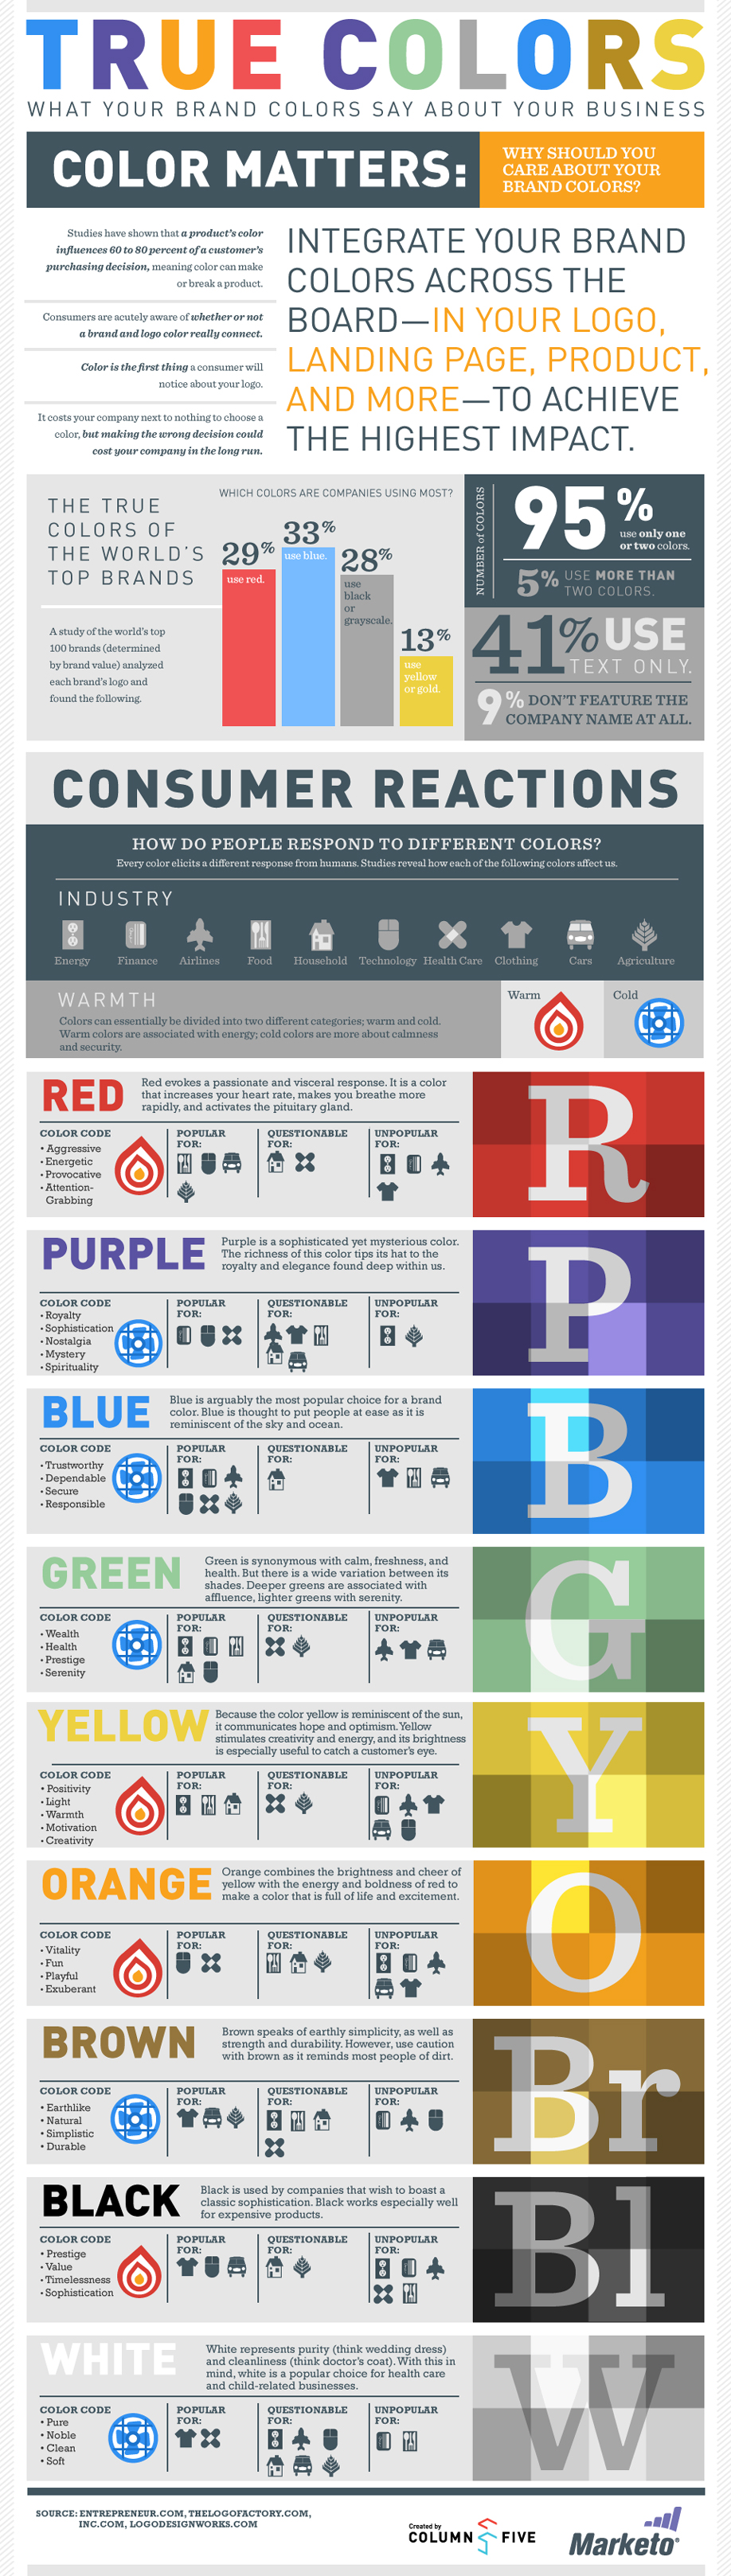 Brand colors infographic